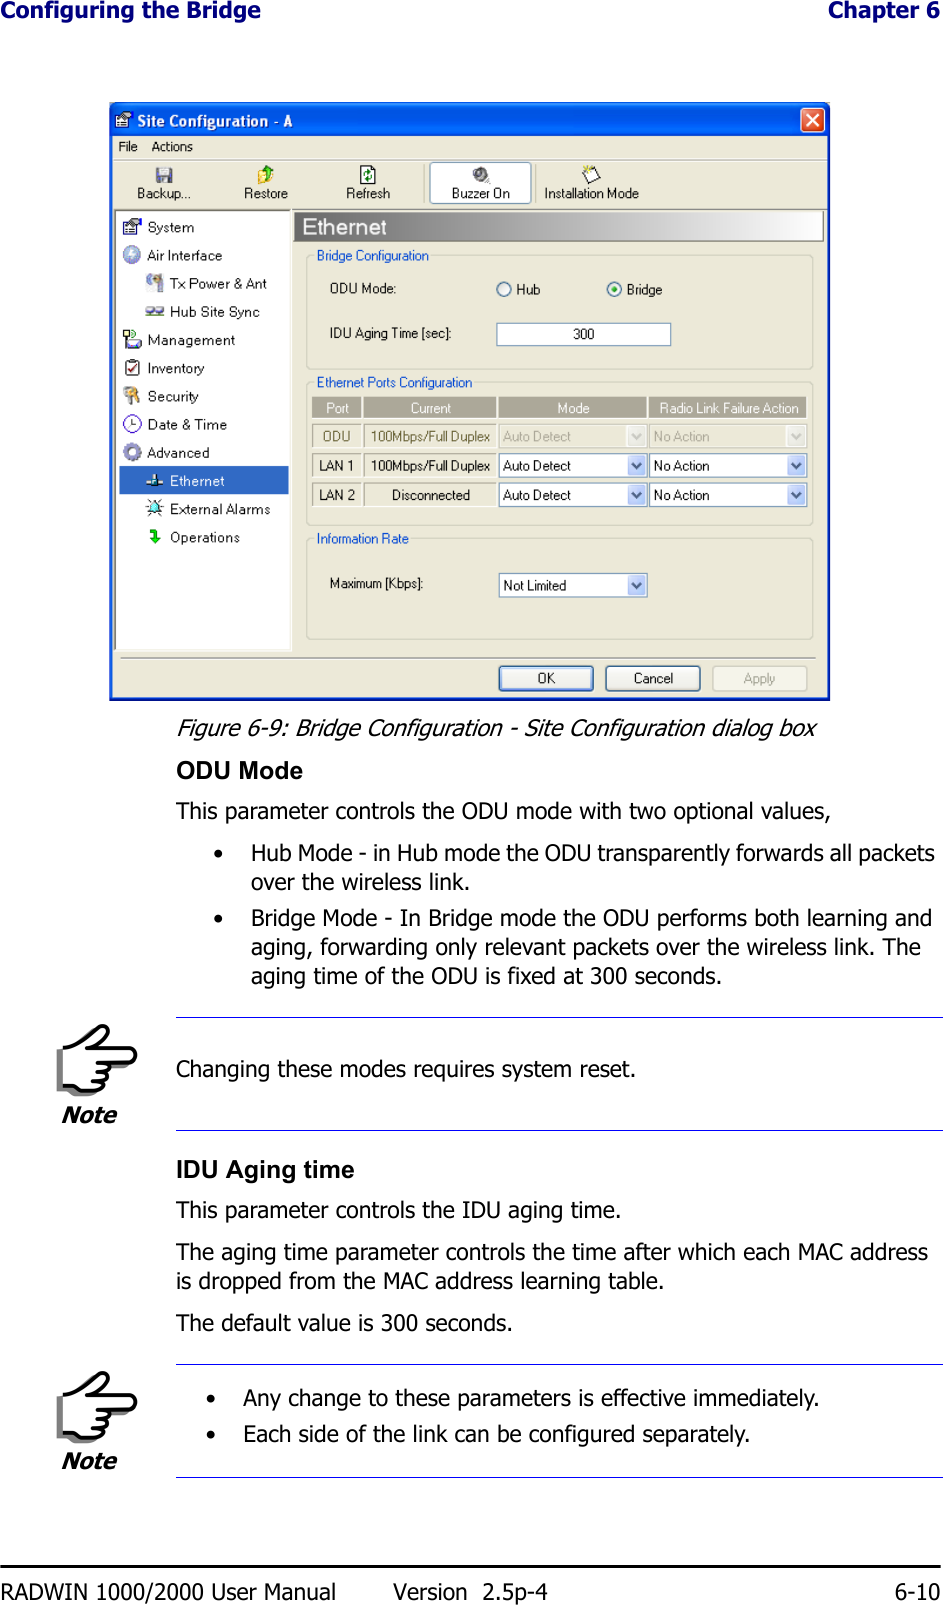 Configuring the Bridge  Chapter 6RADWIN 1000/2000 User Manual Version  2.5p-4 6-10Figure 6-9: Bridge Configuration - Site Configuration dialog boxODU ModeThis parameter controls the ODU mode with two optional values, • Hub Mode - in Hub mode the ODU transparently forwards all packets over the wireless link.• Bridge Mode - In Bridge mode the ODU performs both learning and aging, forwarding only relevant packets over the wireless link. The aging time of the ODU is fixed at 300 seconds.IDU Aging timeThis parameter controls the IDU aging time.The aging time parameter controls the time after which each MAC address is dropped from the MAC address learning table.The default value is 300 seconds.NoteChanging these modes requires system reset.Note• Any change to these parameters is effective immediately.• Each side of the link can be configured separately.